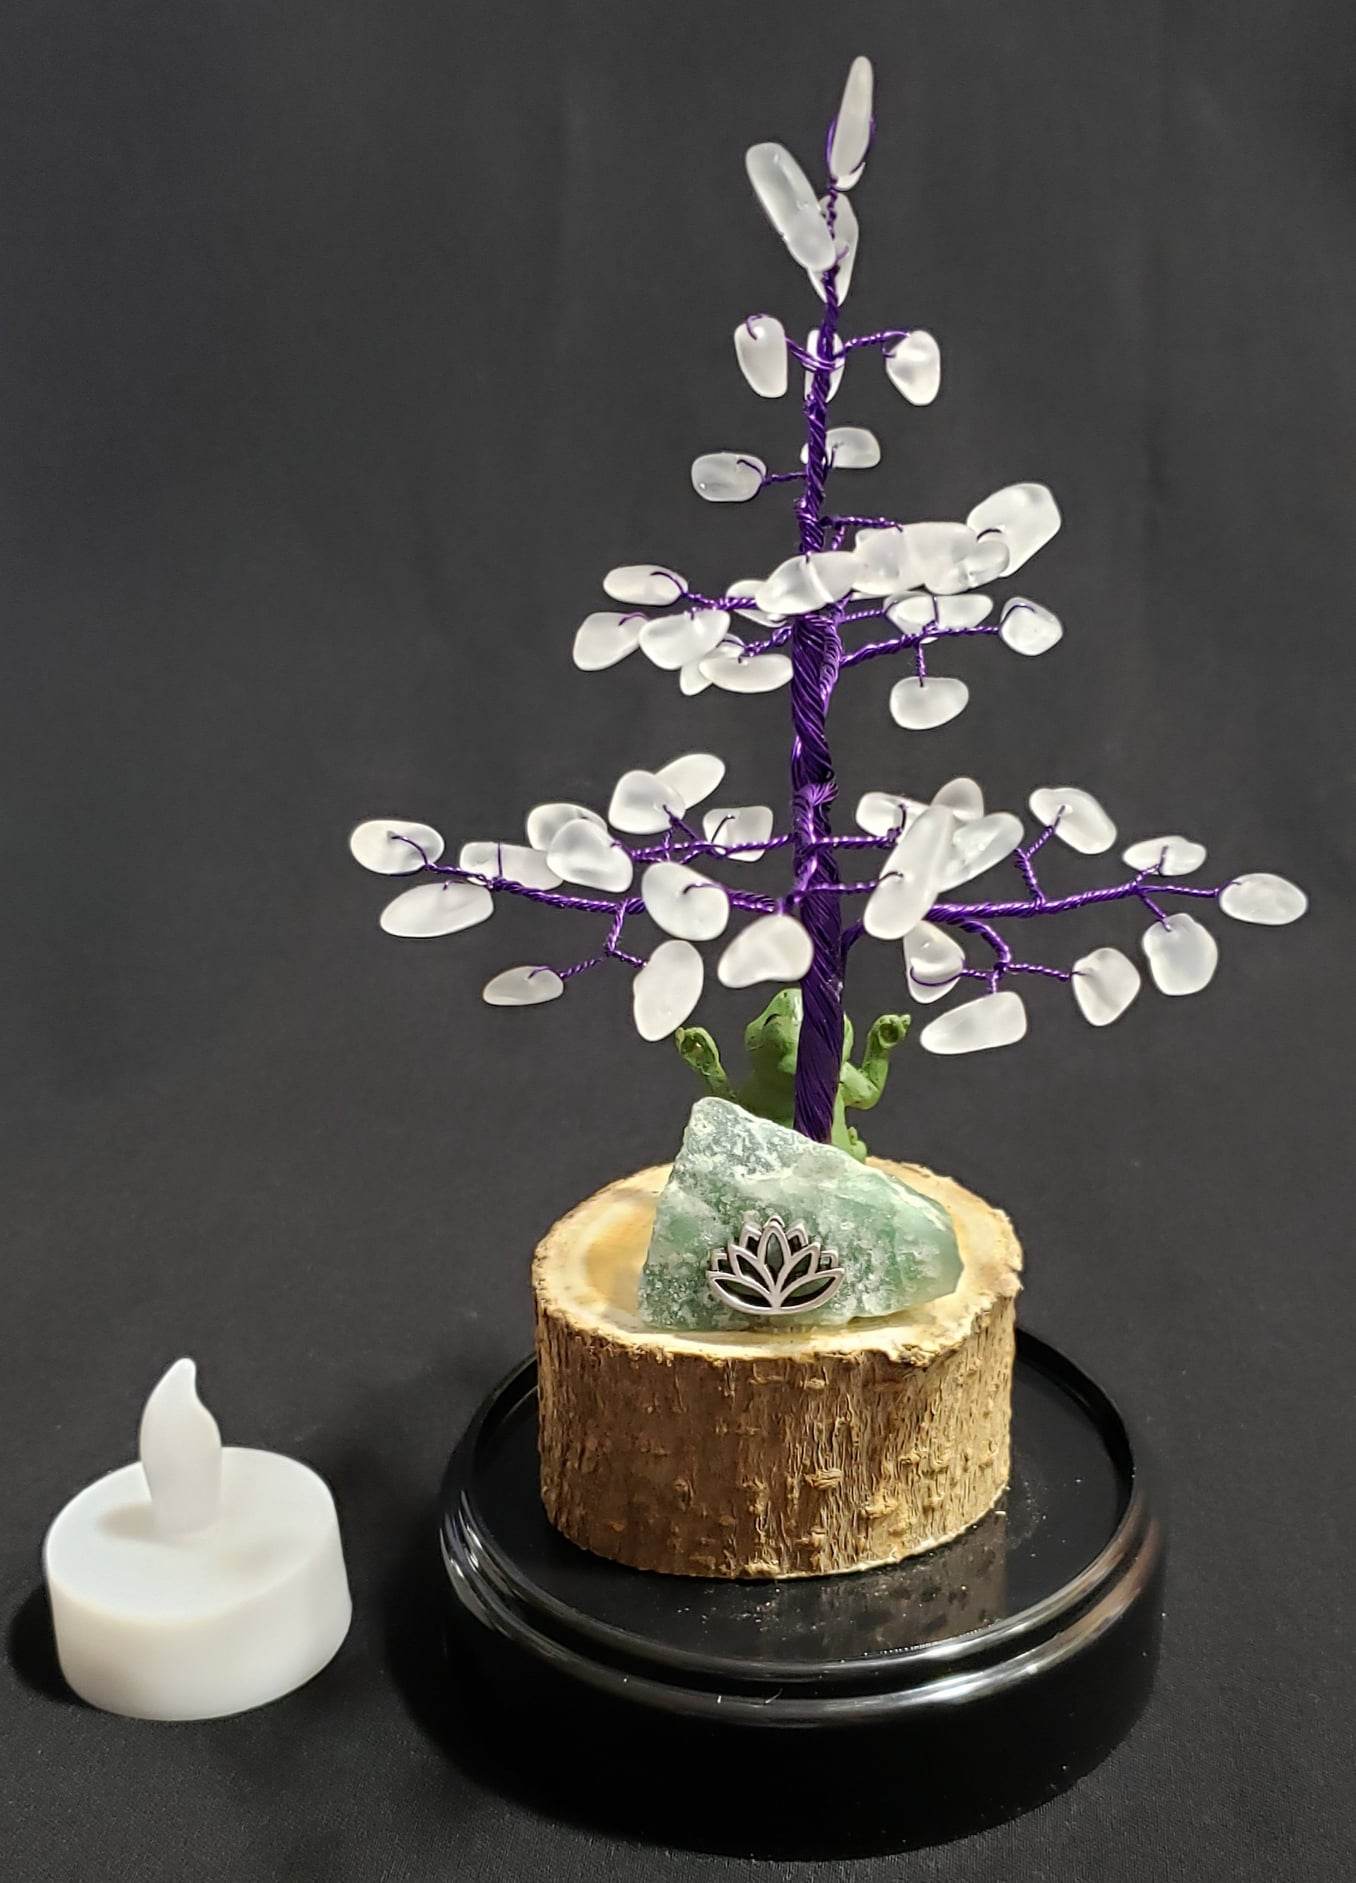 Handmade Gemstone Wire Tree - Frosted Quartz with meditating frog